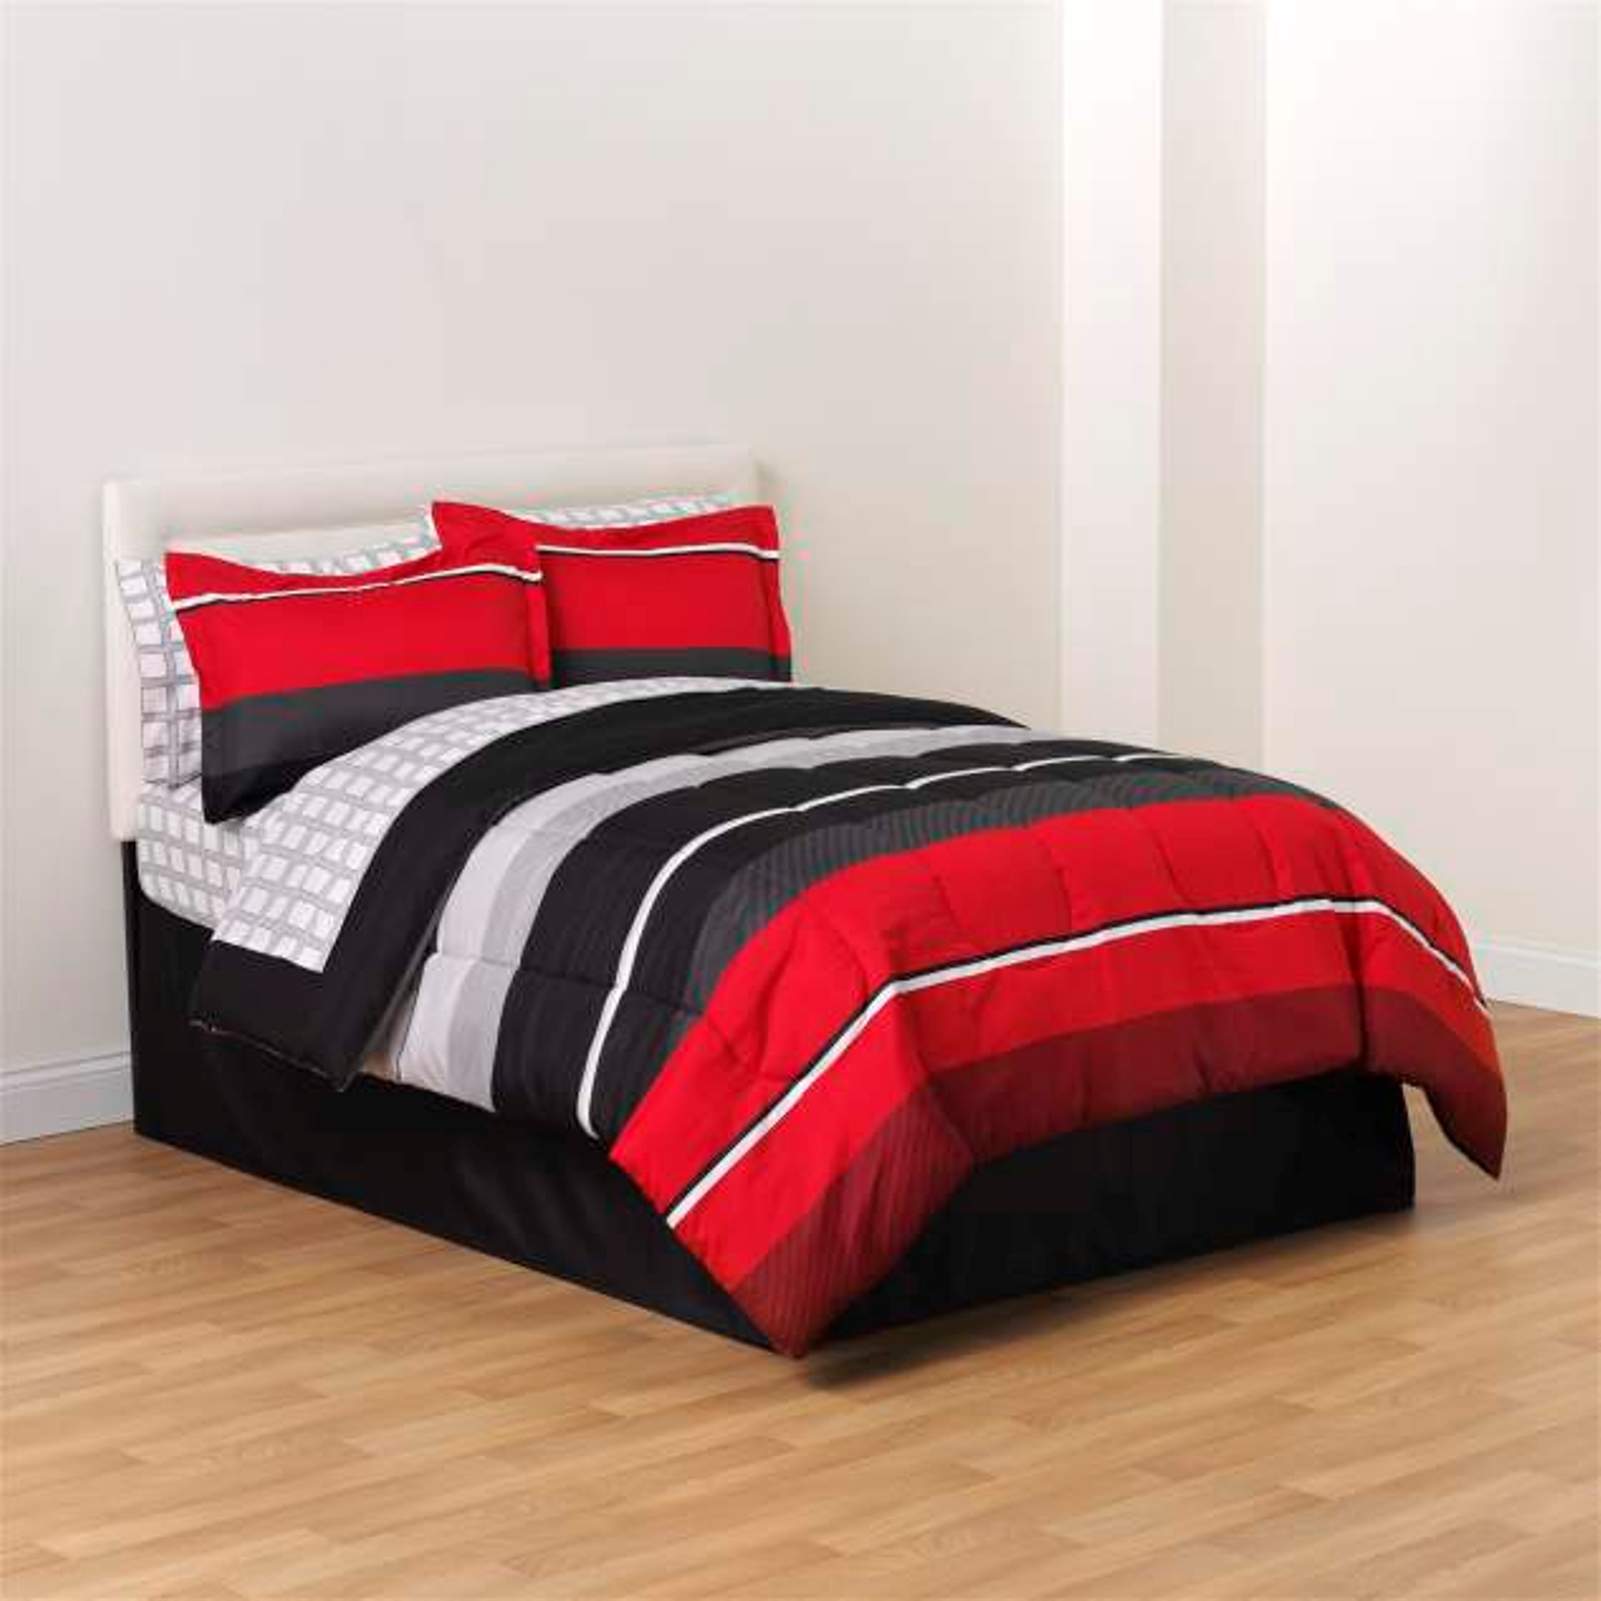 black and red full.size comforter